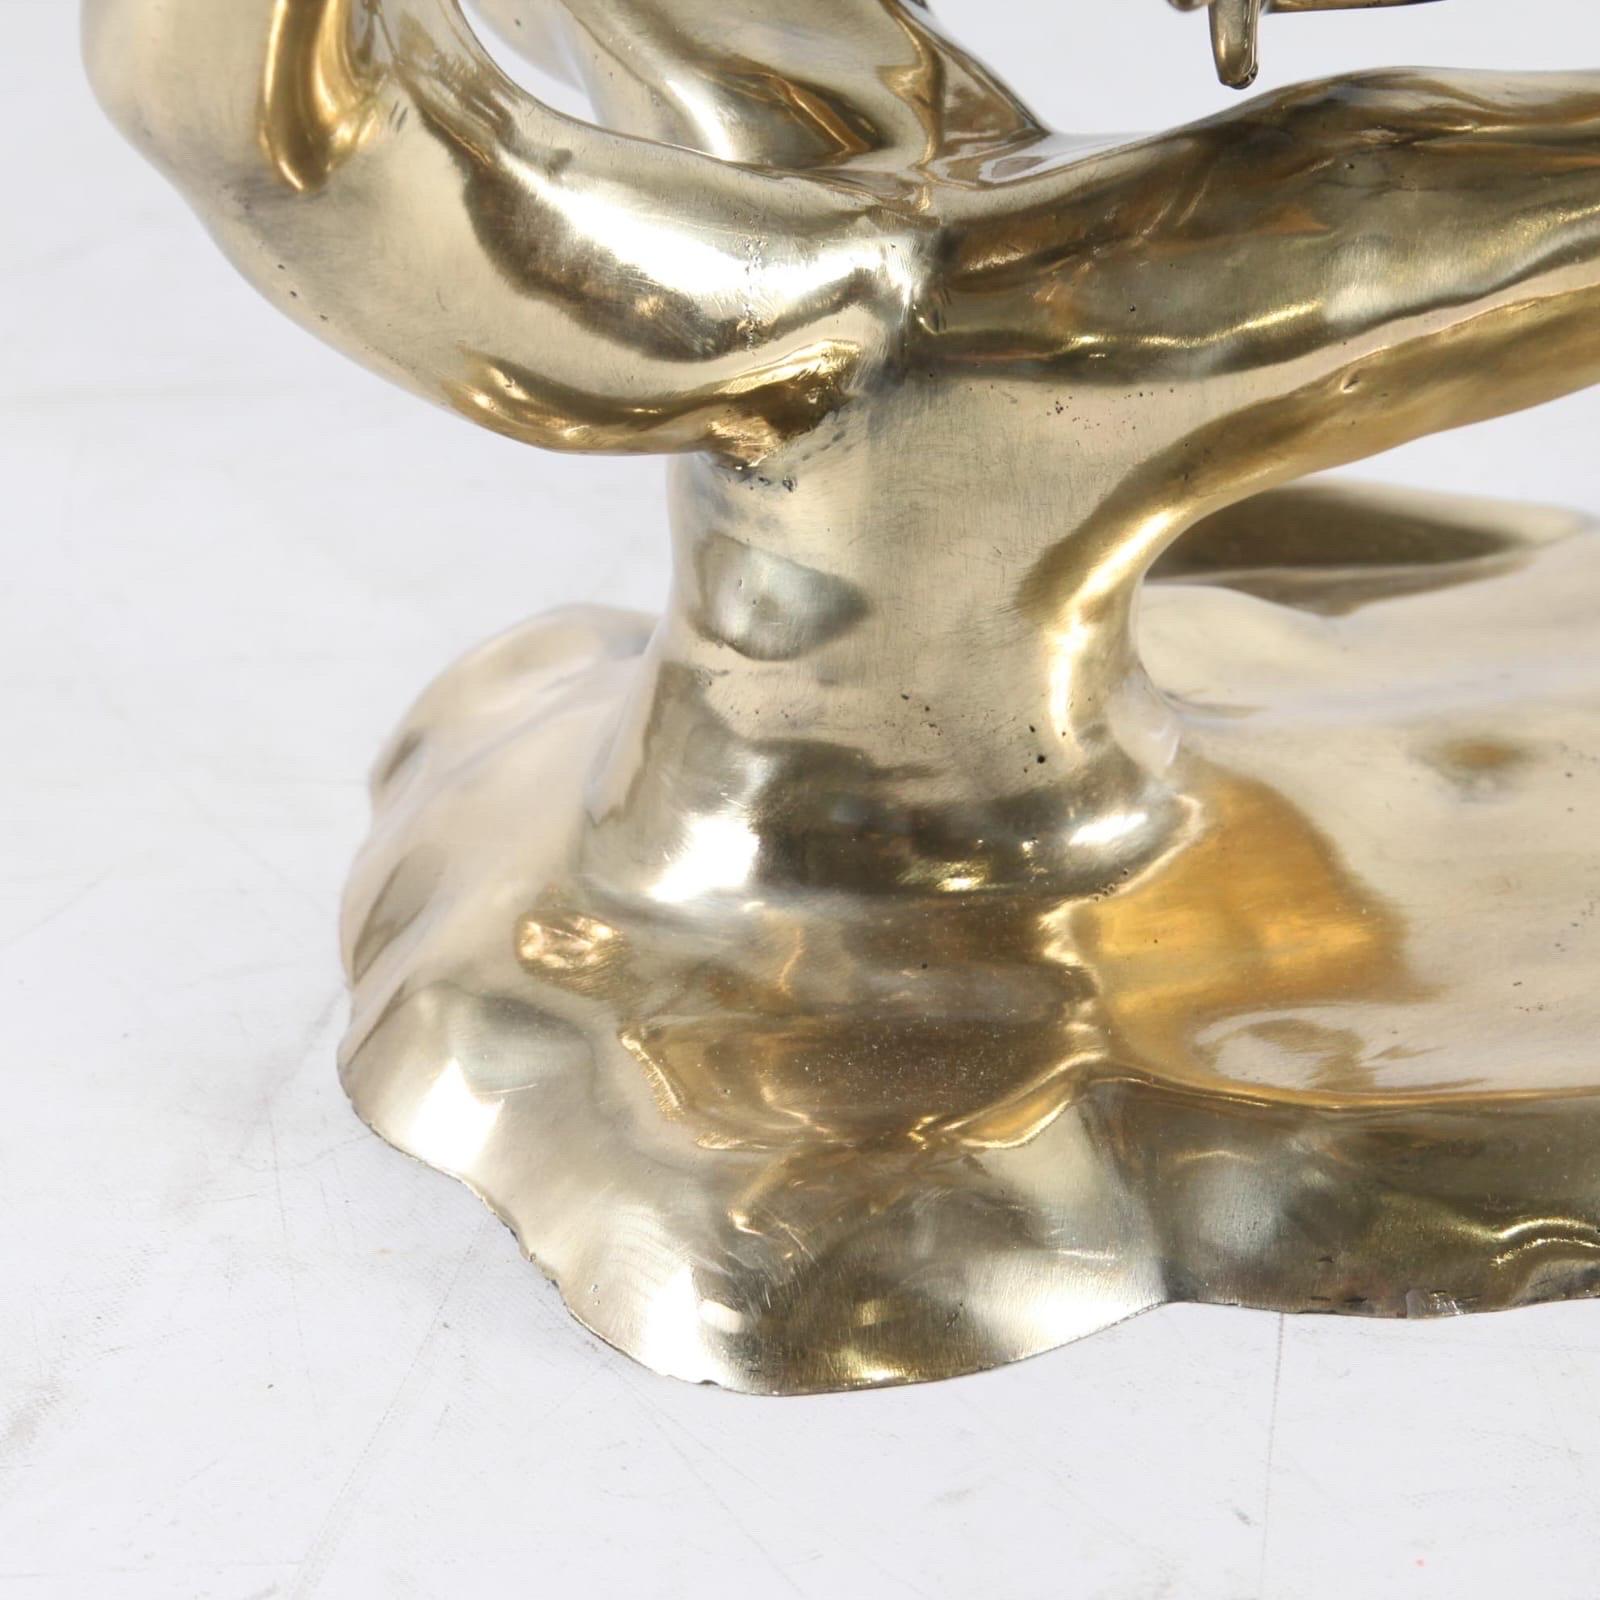 Rare polished brass « bonsaï » coffee table attributed to Willy Daro.
Very decorative, great quality. Excellent condition.